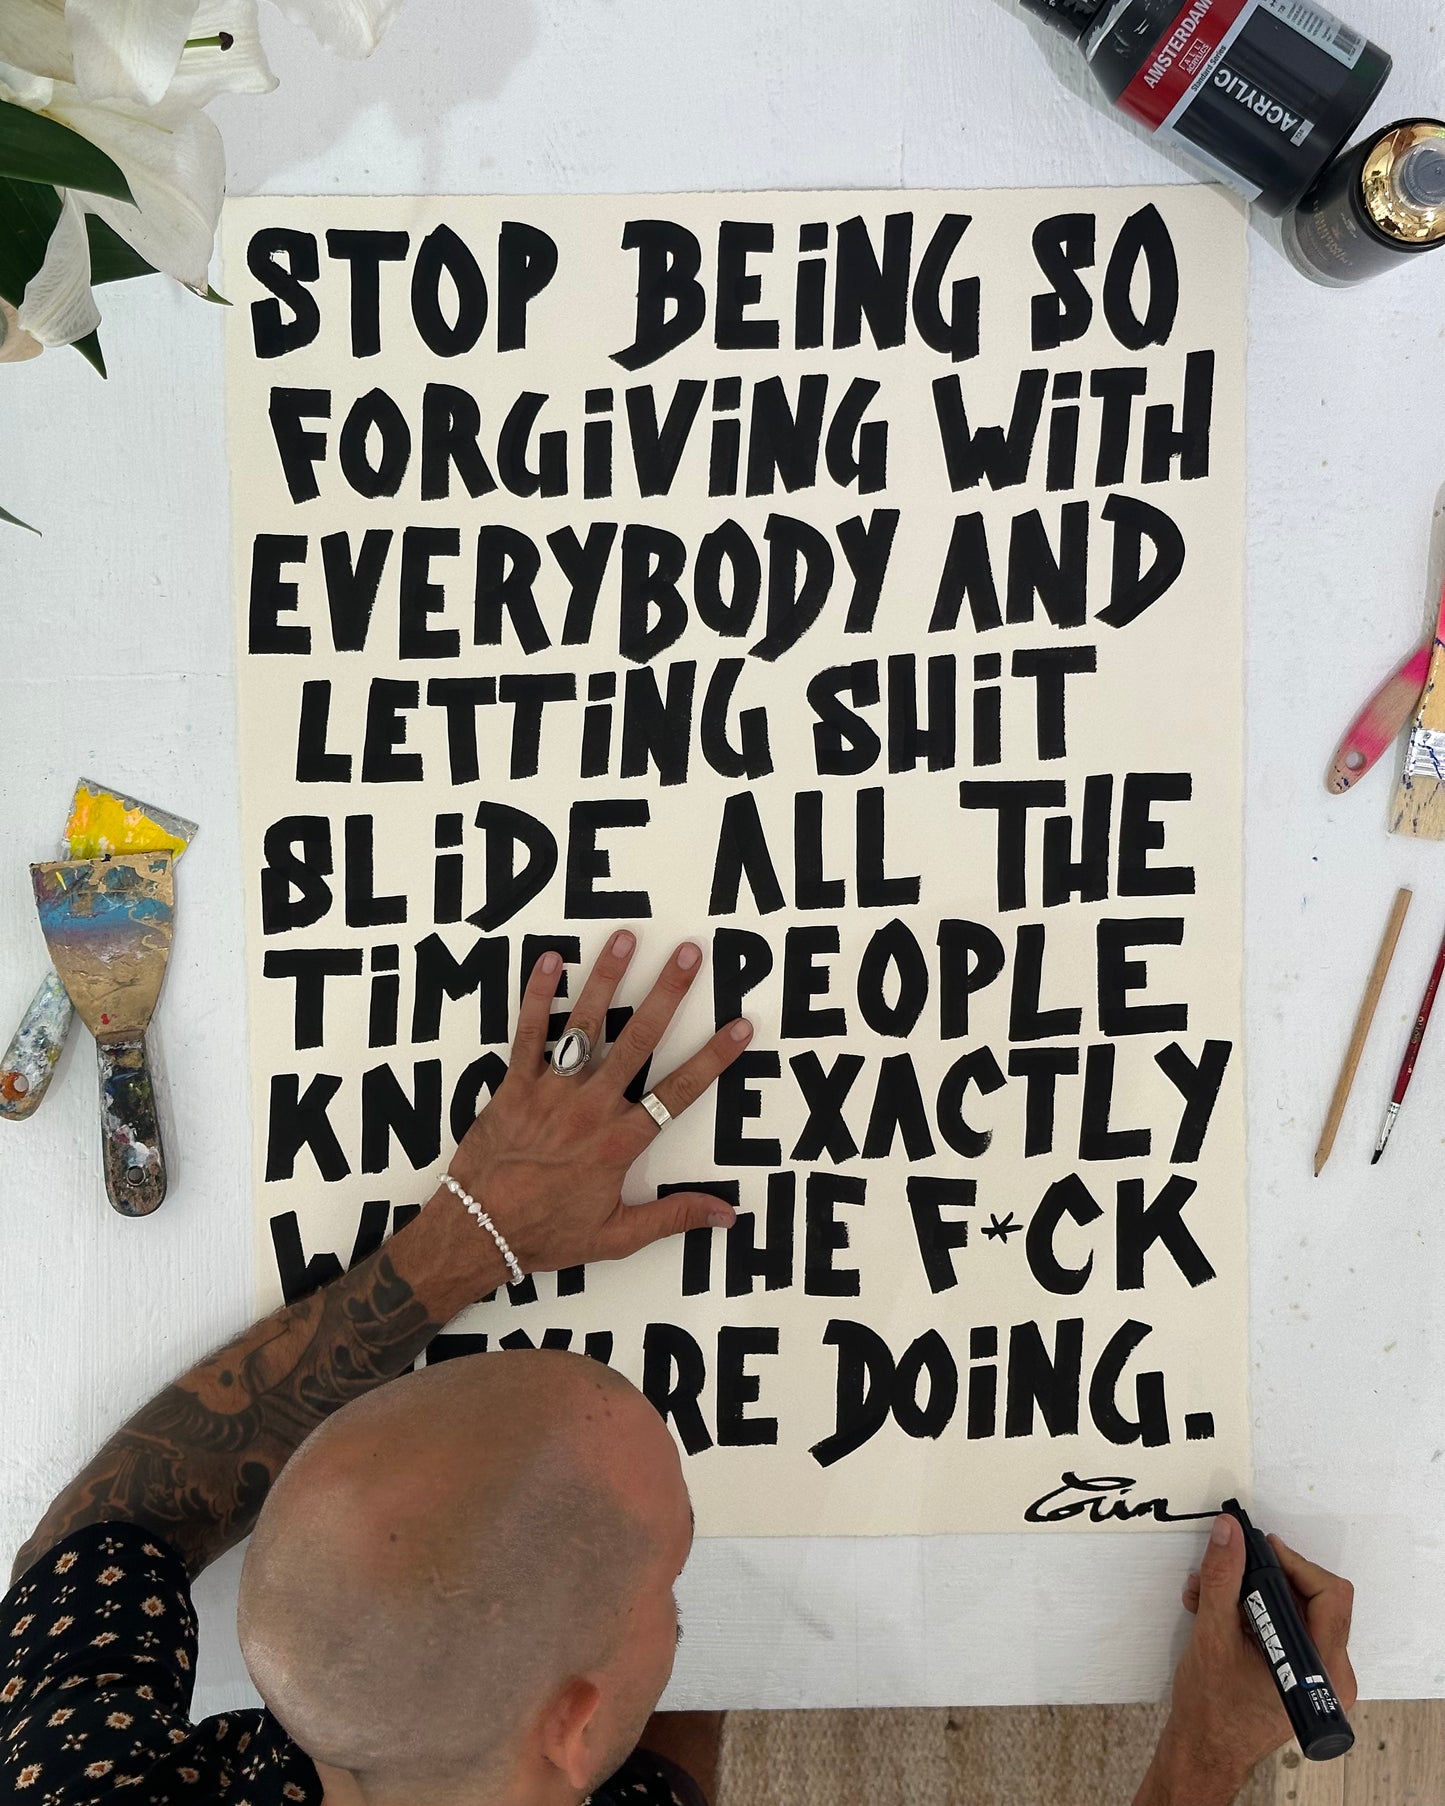 STOP BEING SO FORGIVING WITH...